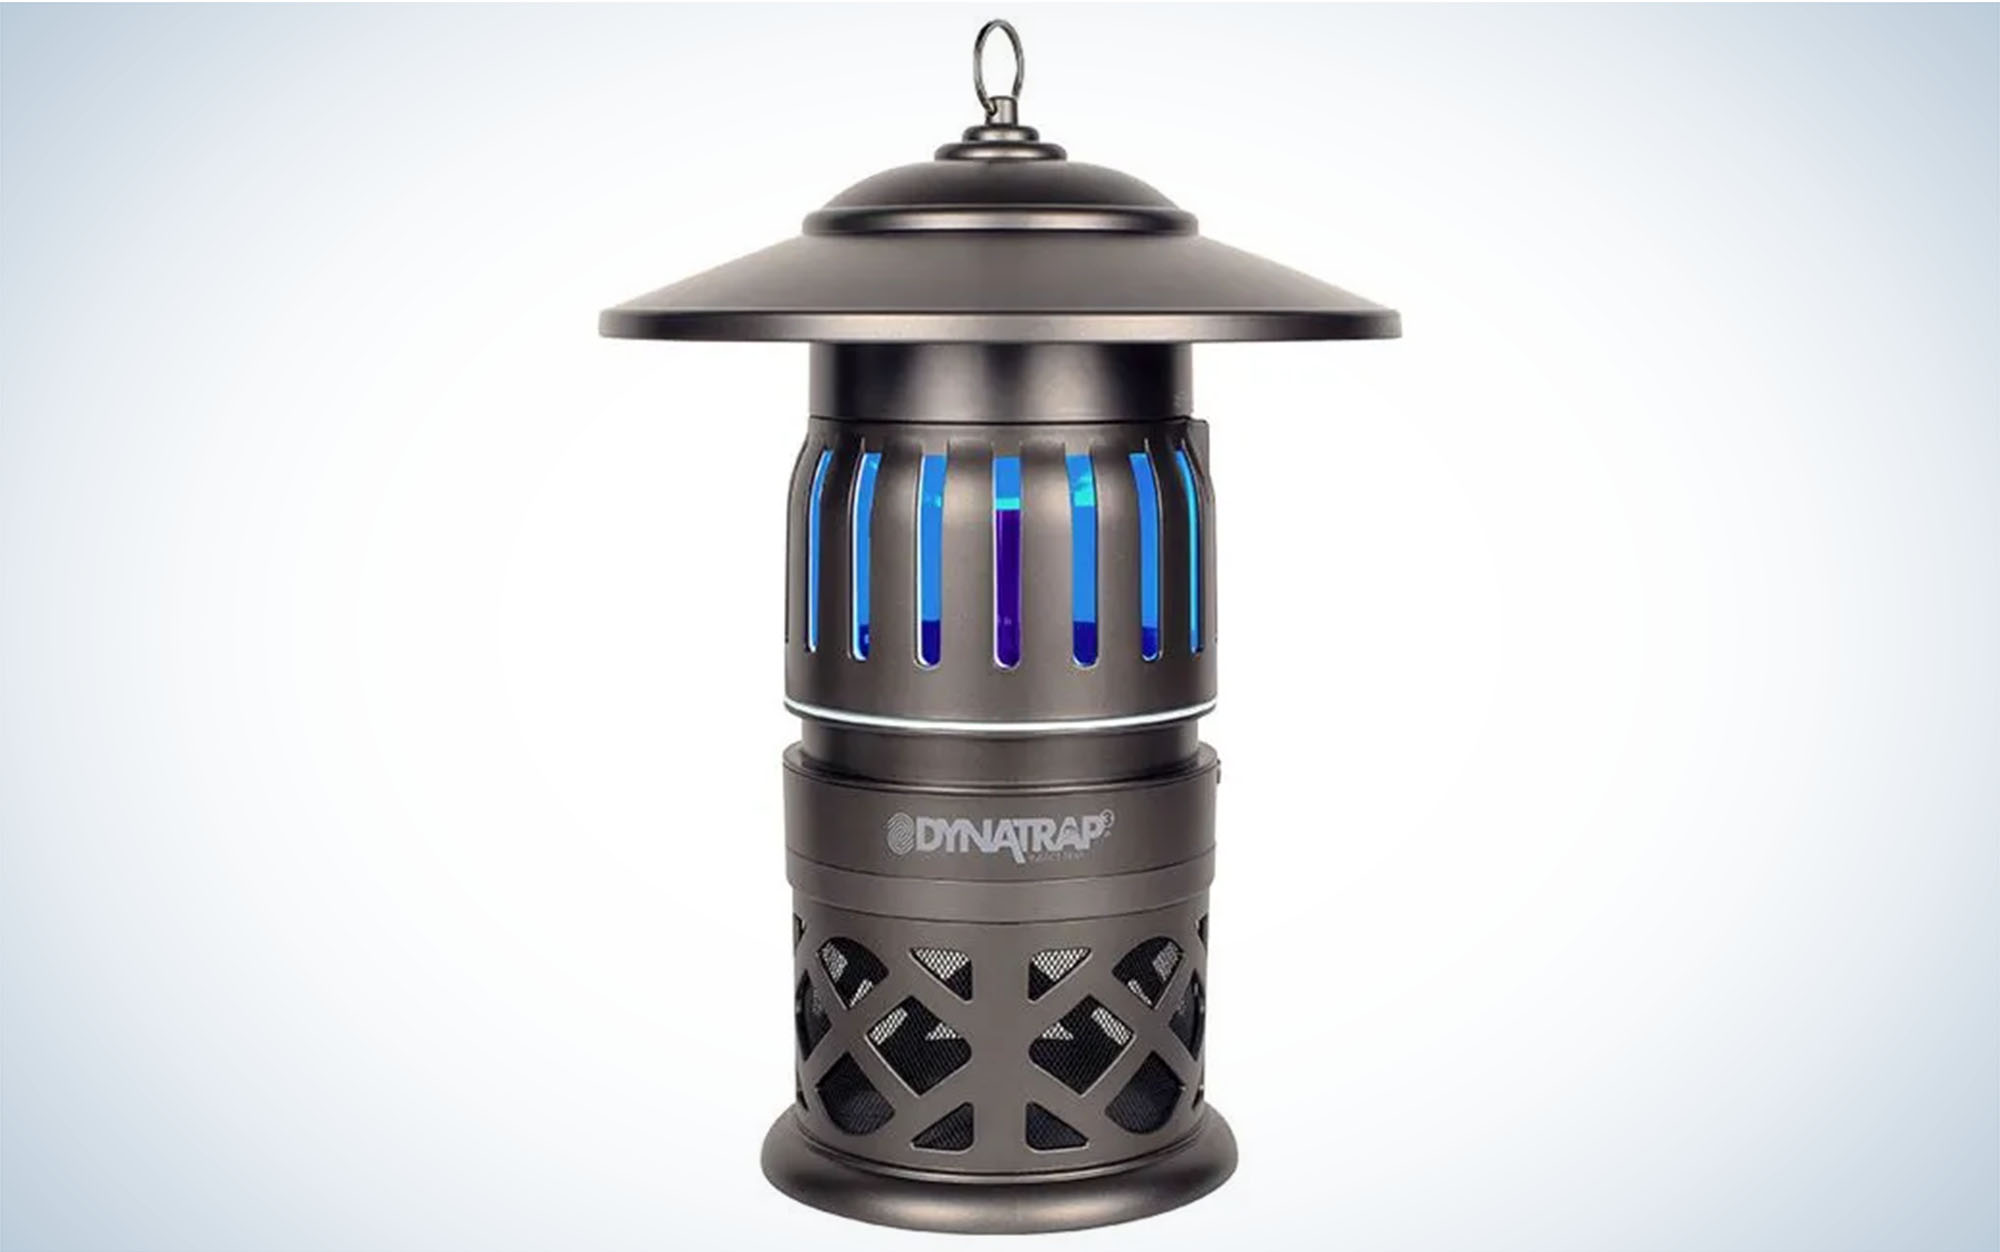 We tested the DynaTrap Â½ Acre Decora Series Mosquito and Insect Trap.